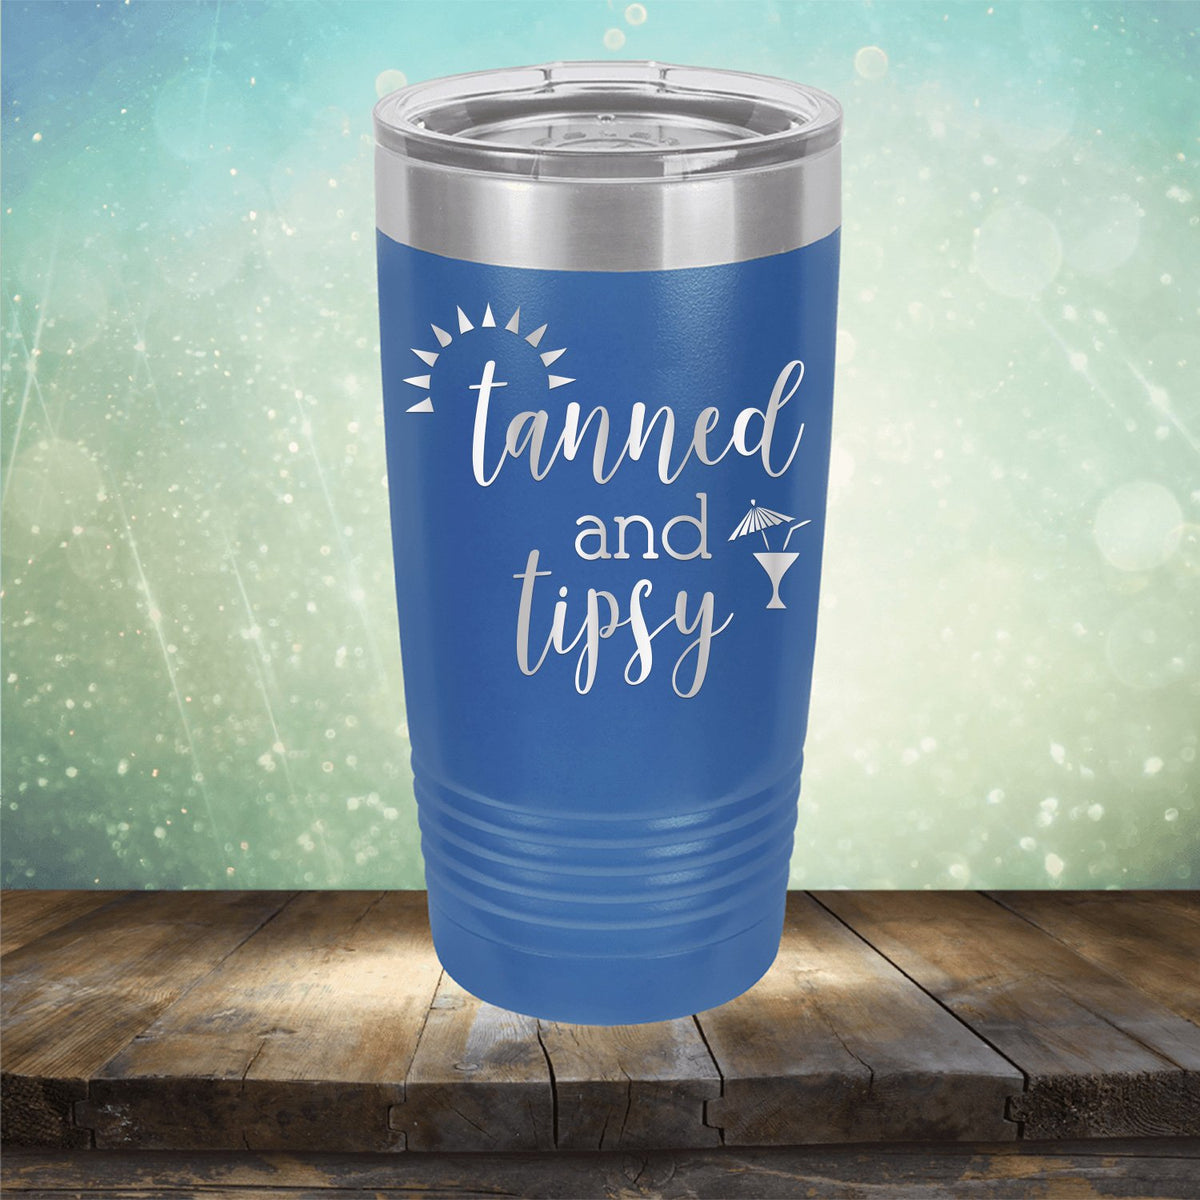 Tanned and Tipsy - Laser Etched Tumbler Mug